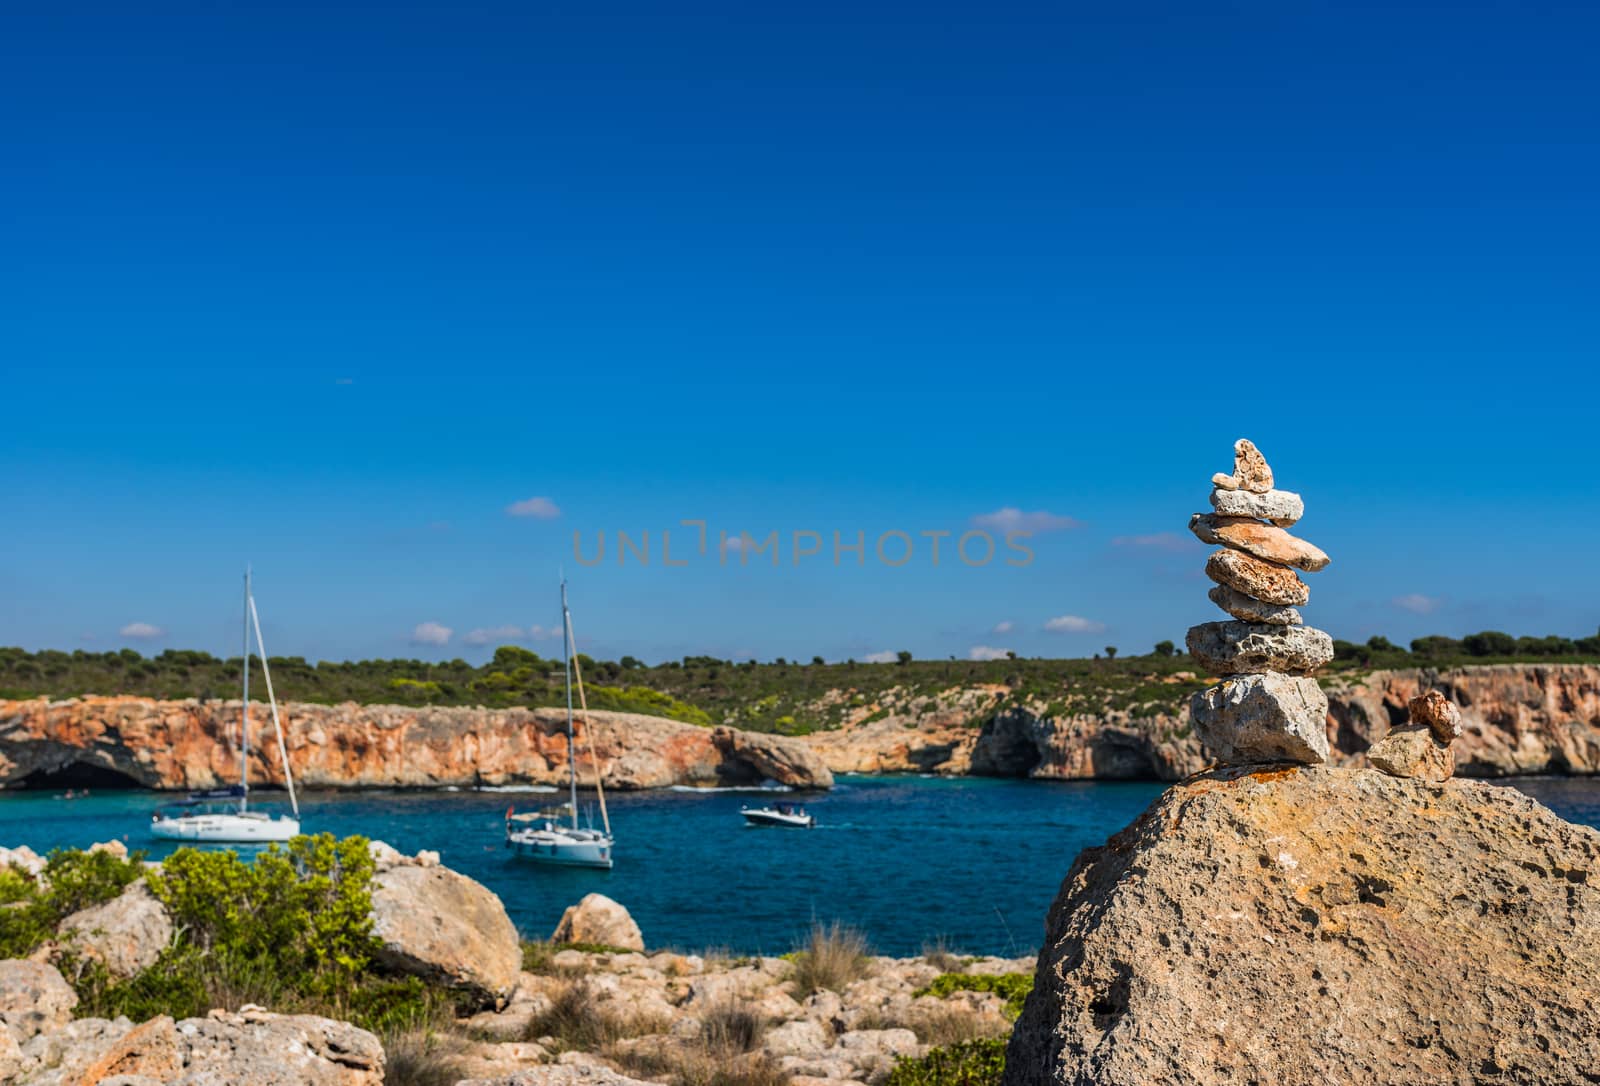 Idyllic bay with boats and stone stack at the coast of Mallorca, Spain Balearic Islands